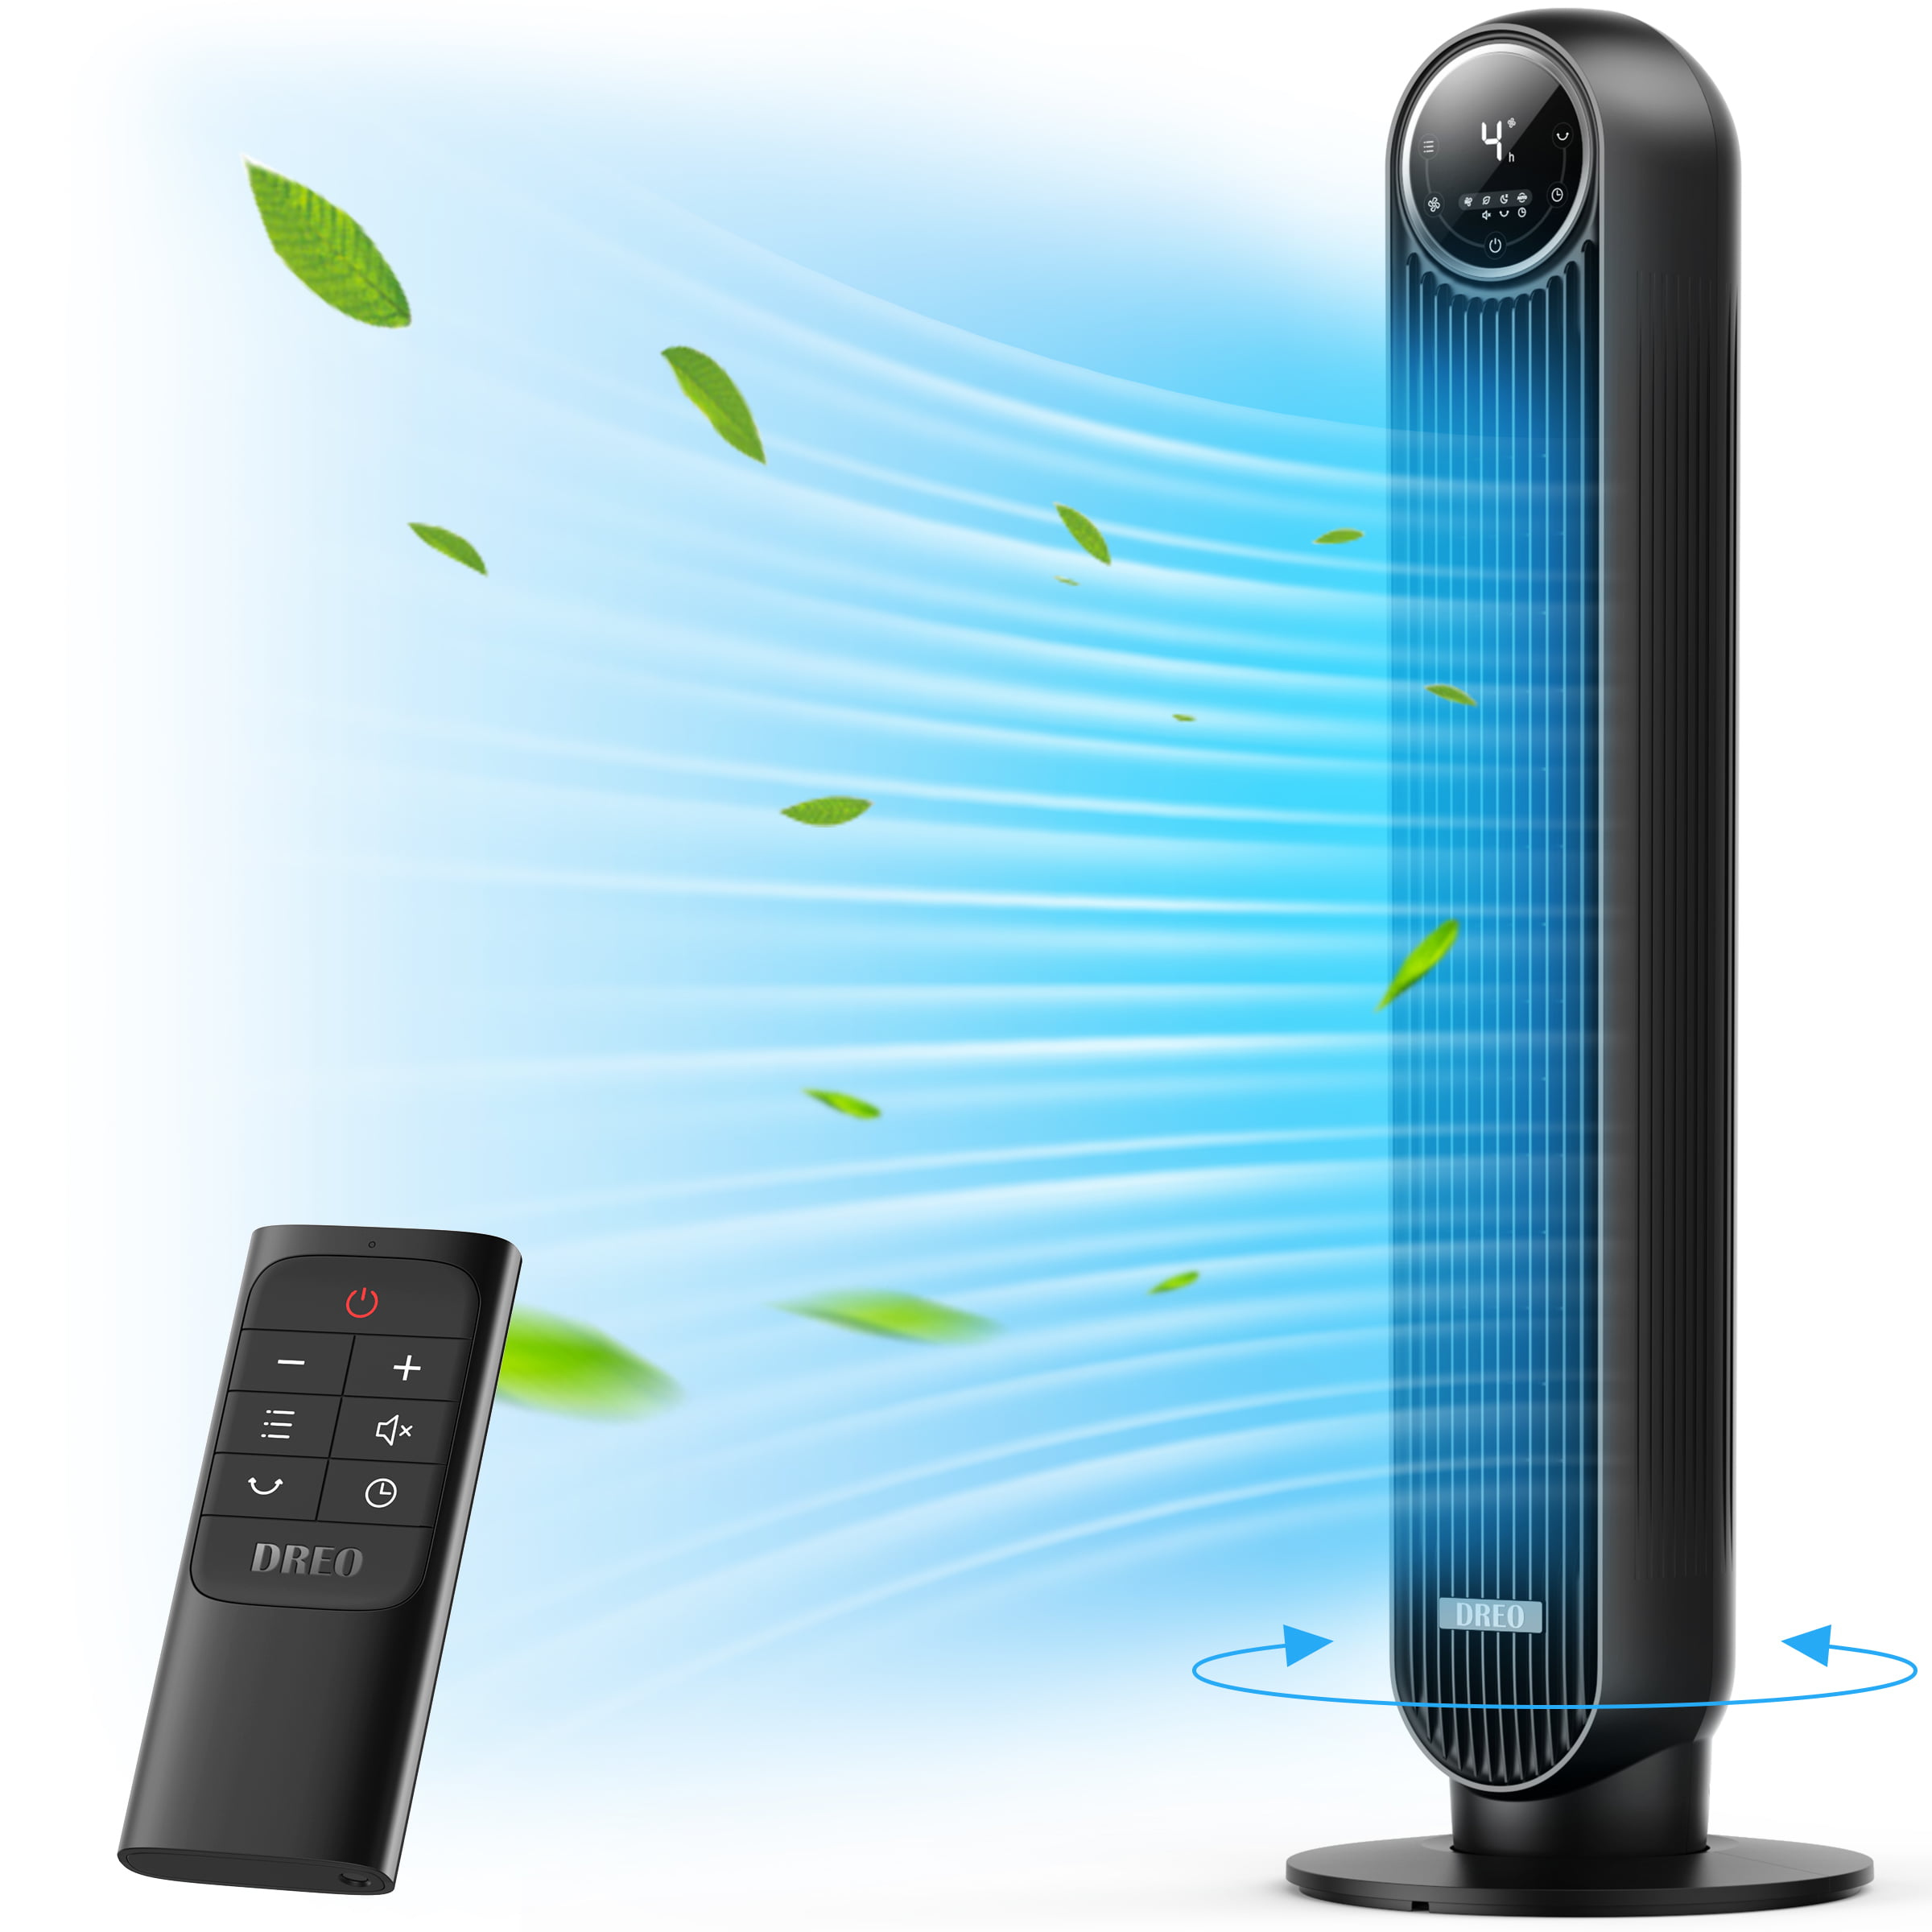 Model 251 Lasko 36" 3-Speed Oscillating Tower Fan with Remote Control and Timer